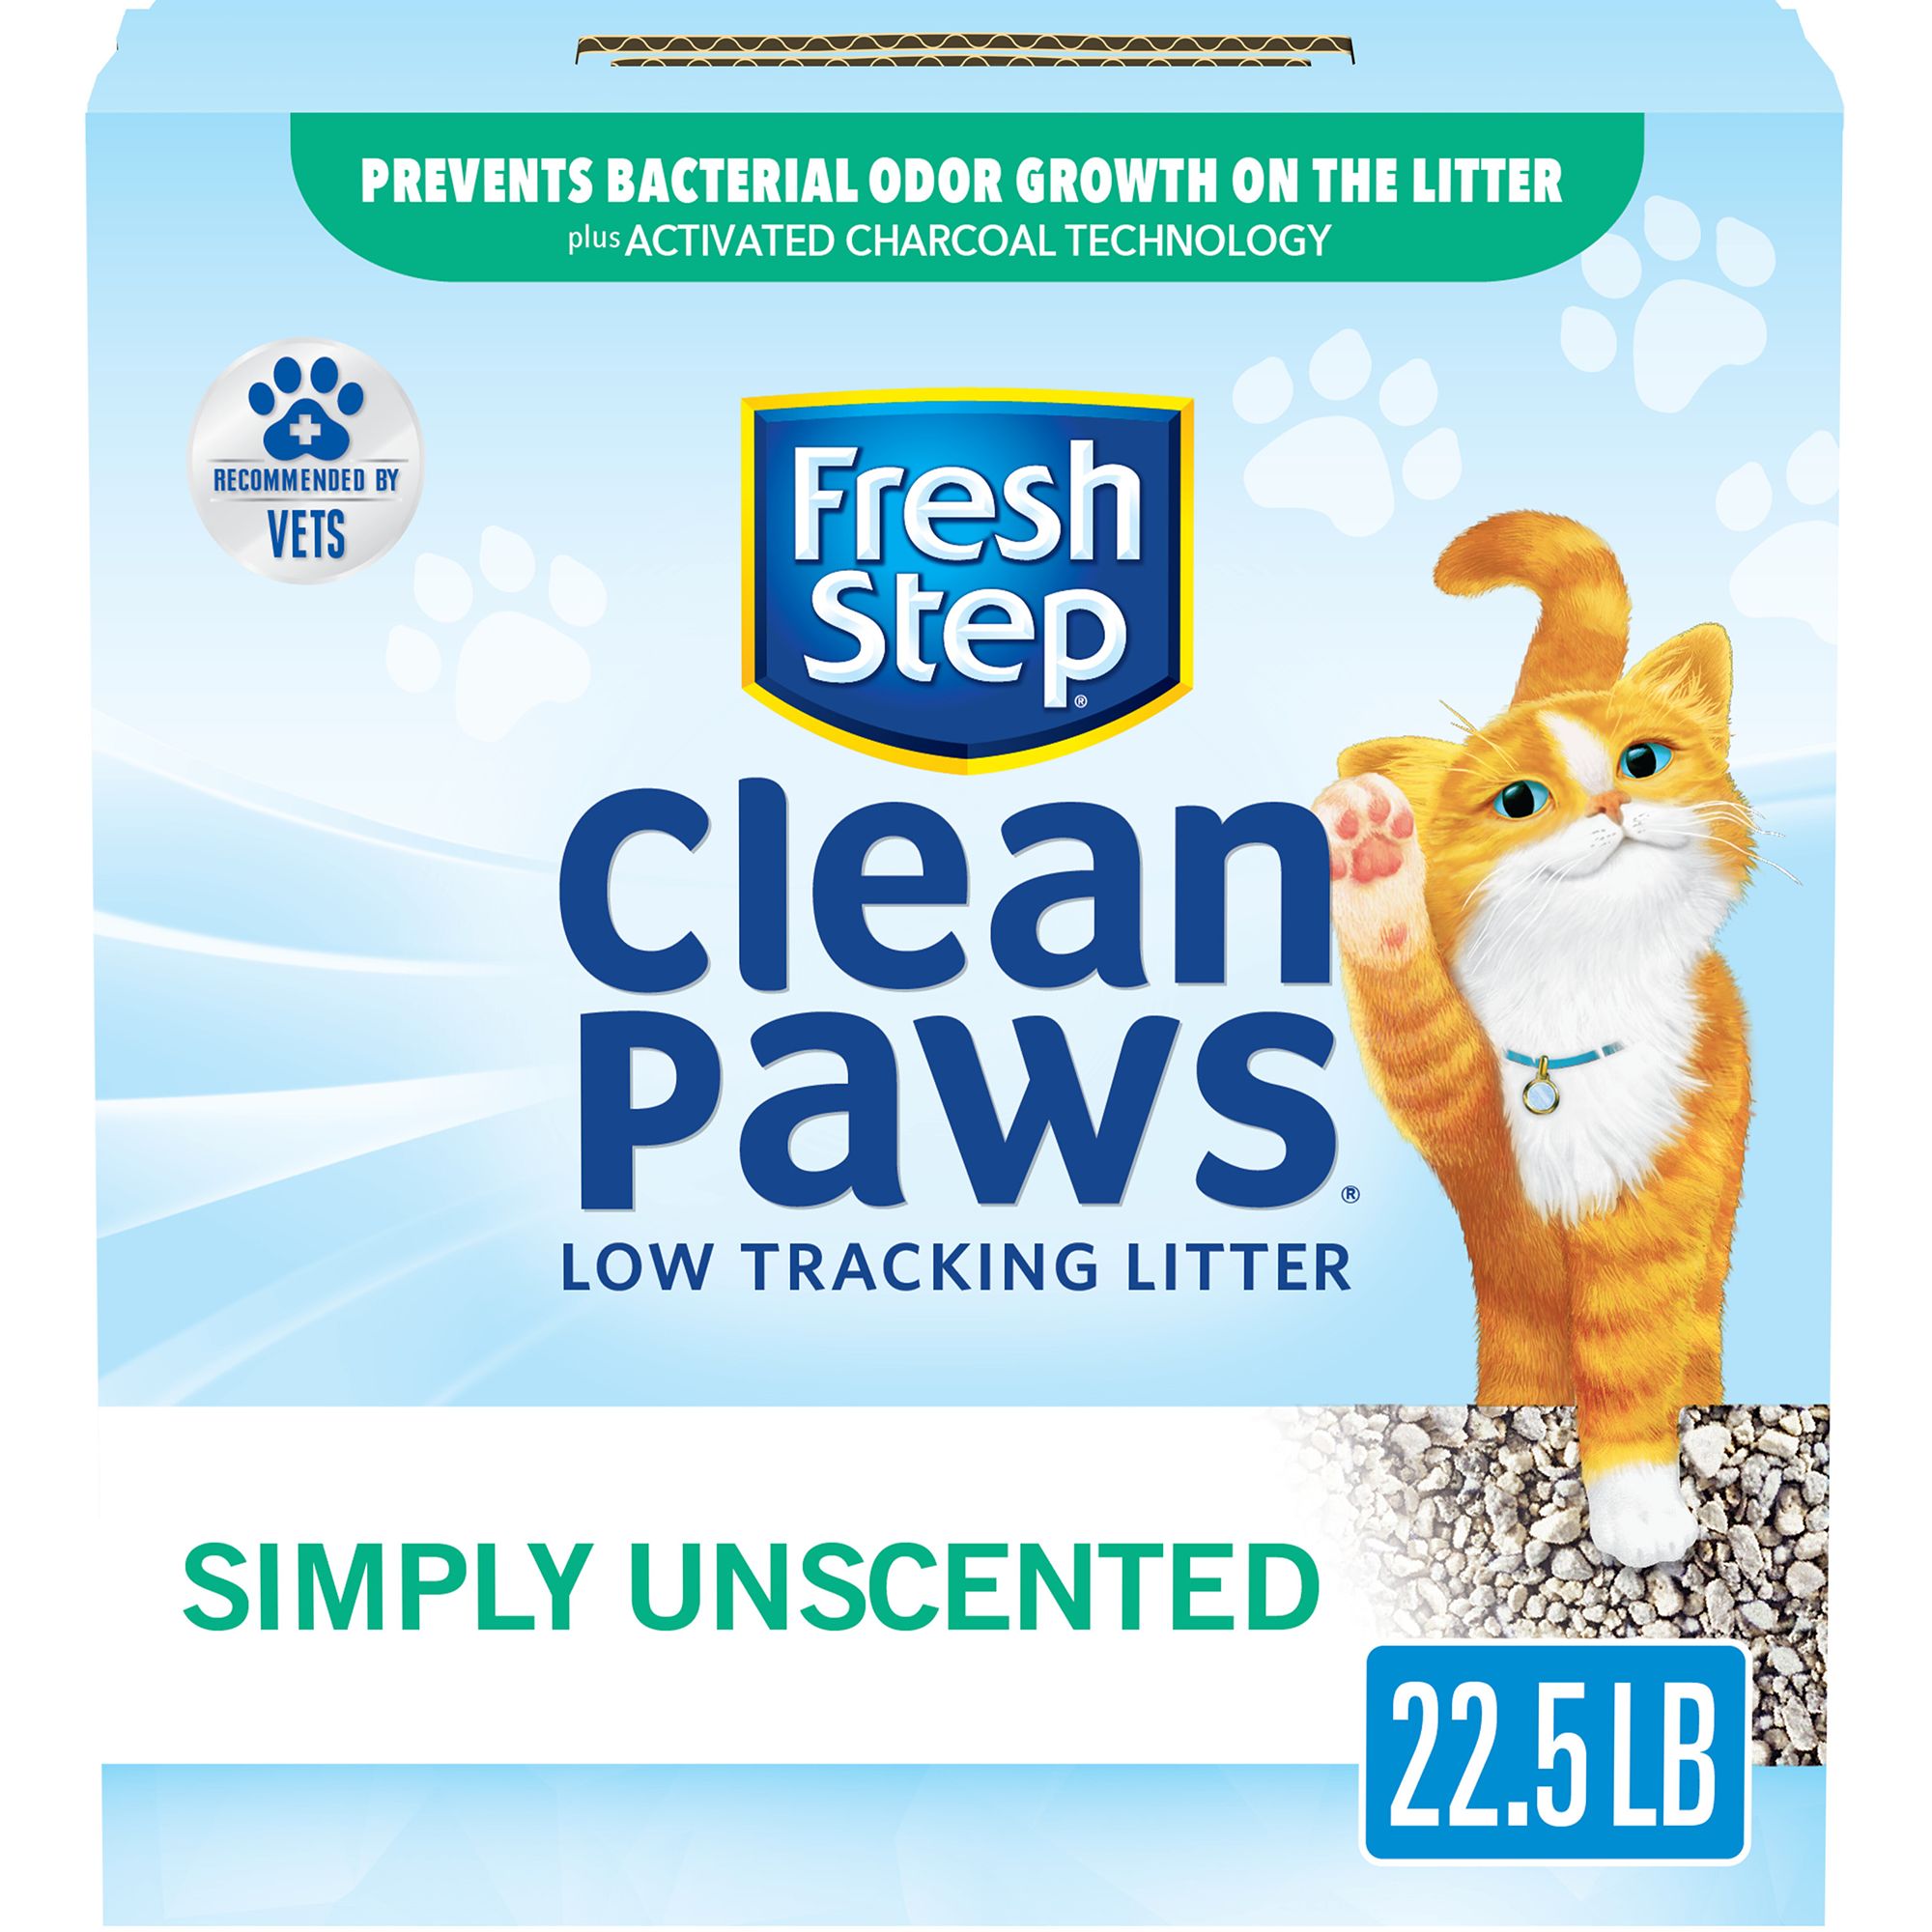 Fresh Step Fresh Step Clean Paws Online Commercial, 2020 